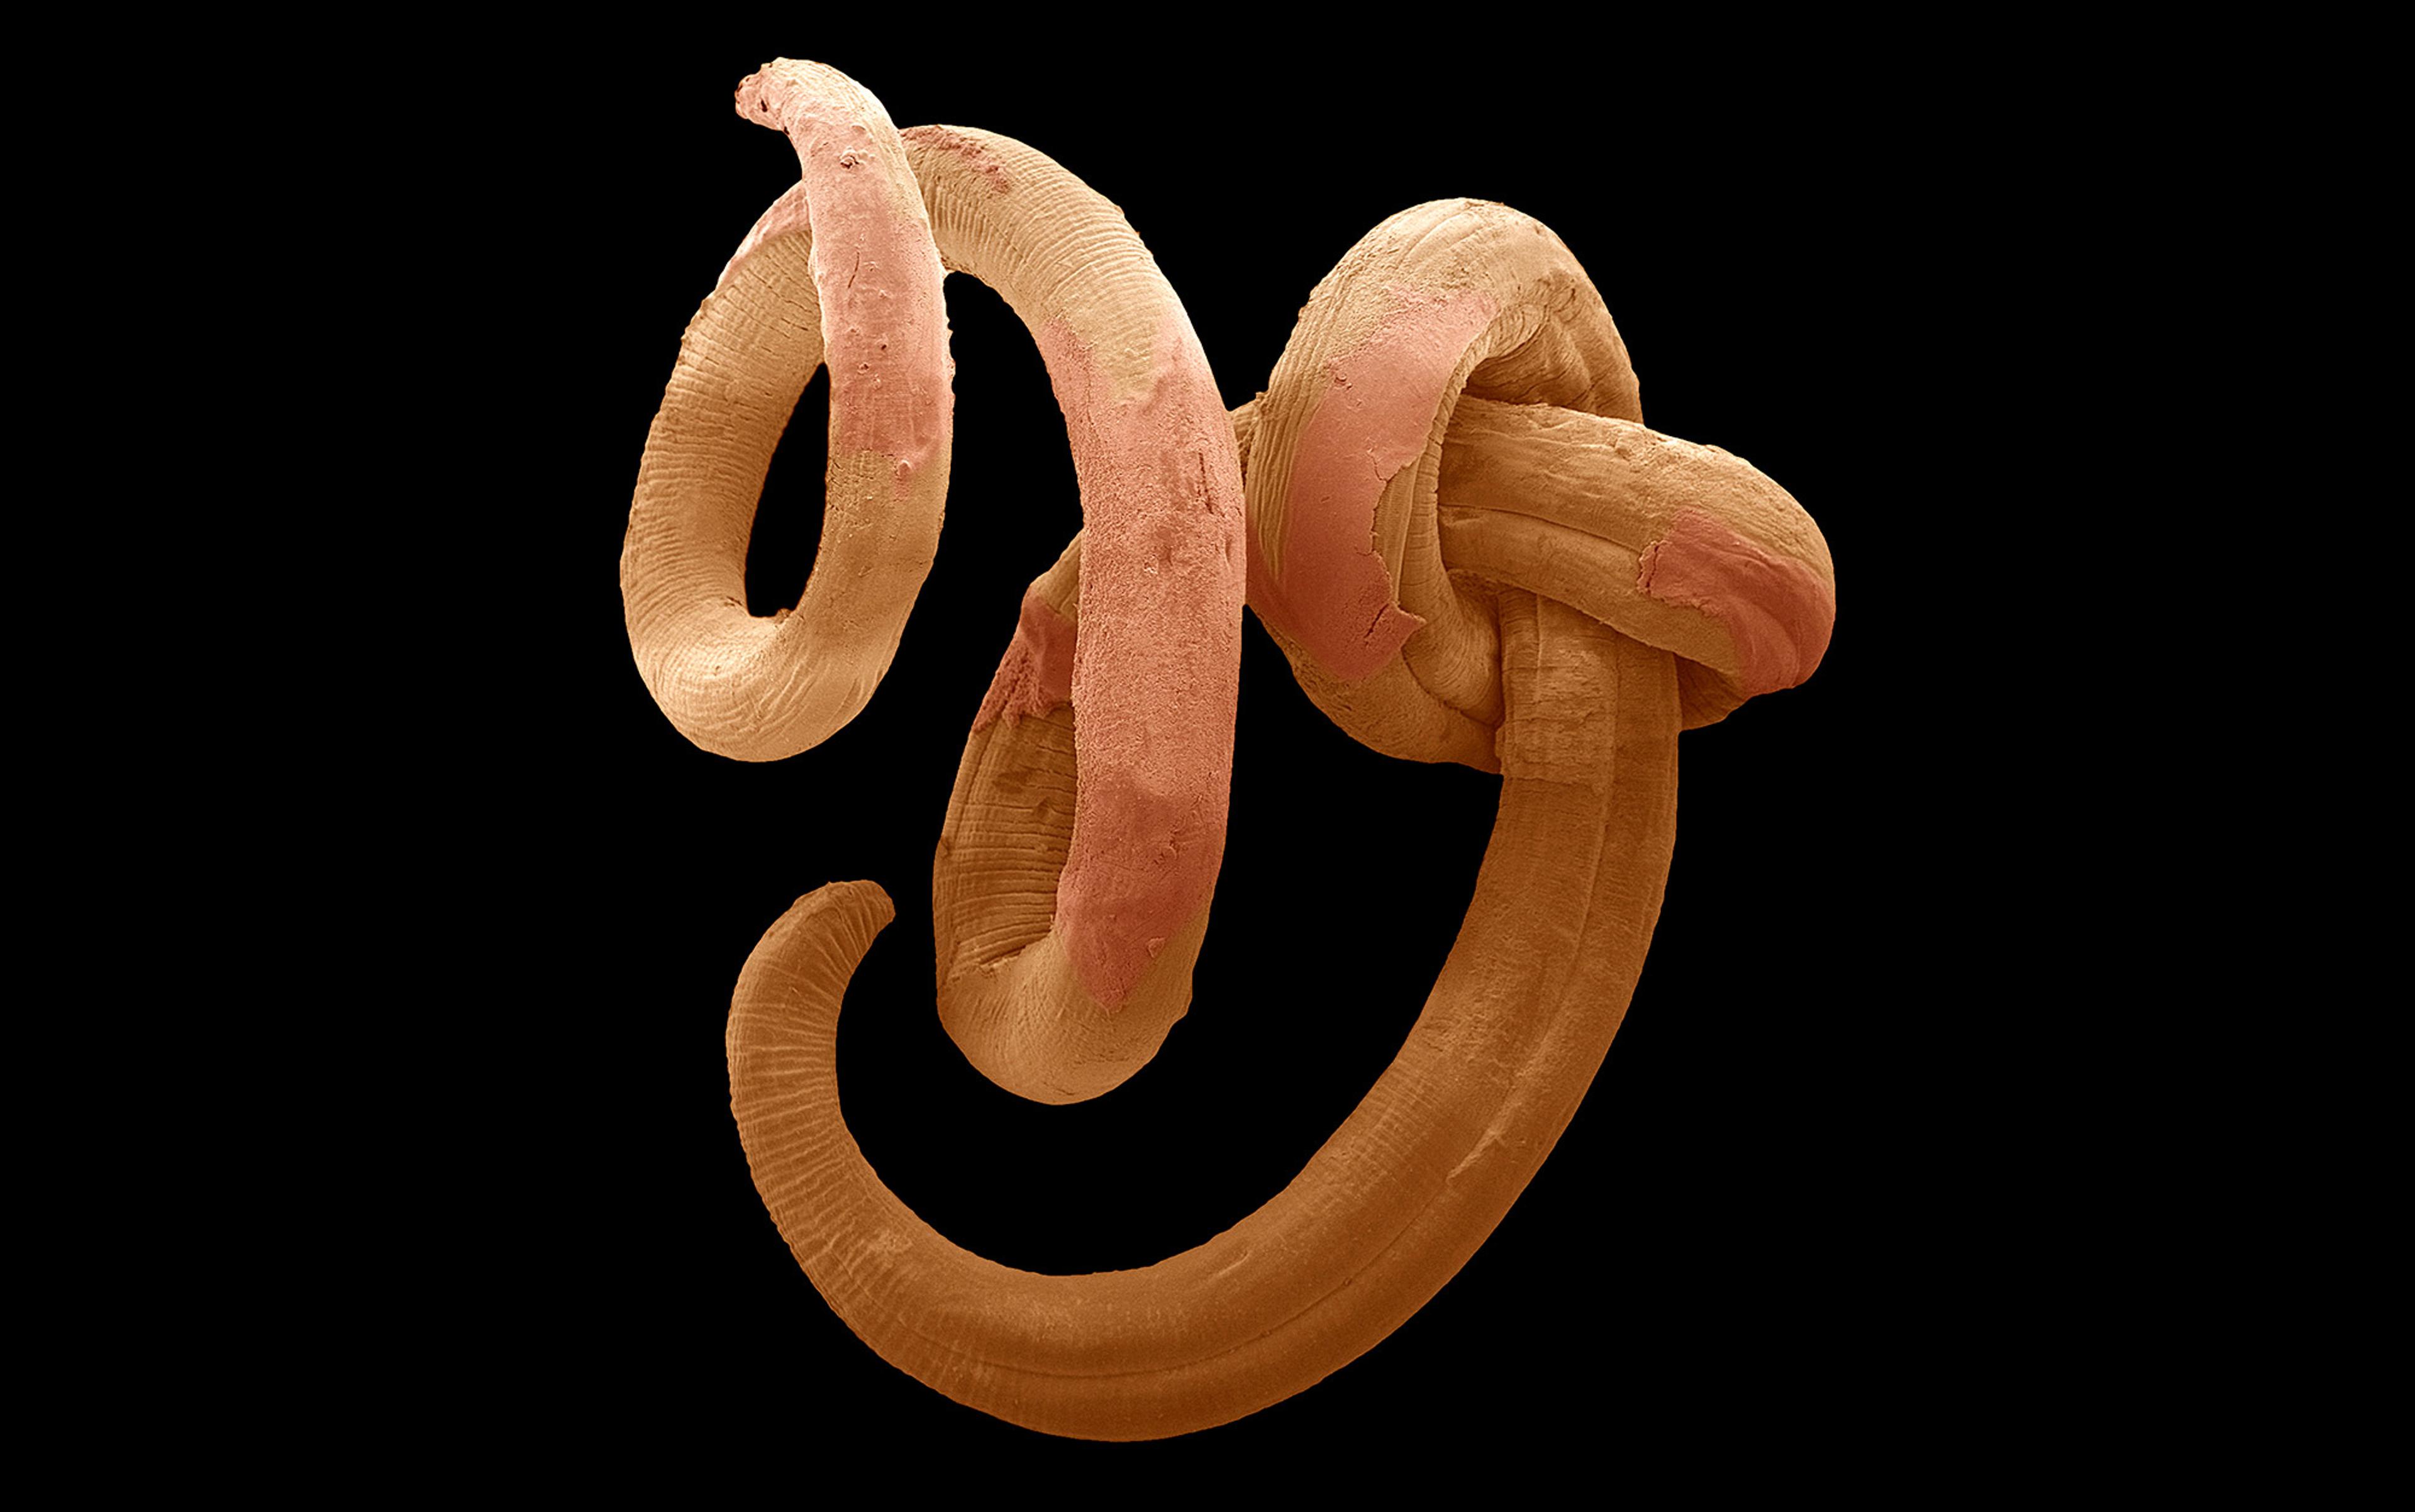 Gut worms were once a cause of disease, now they are a cure